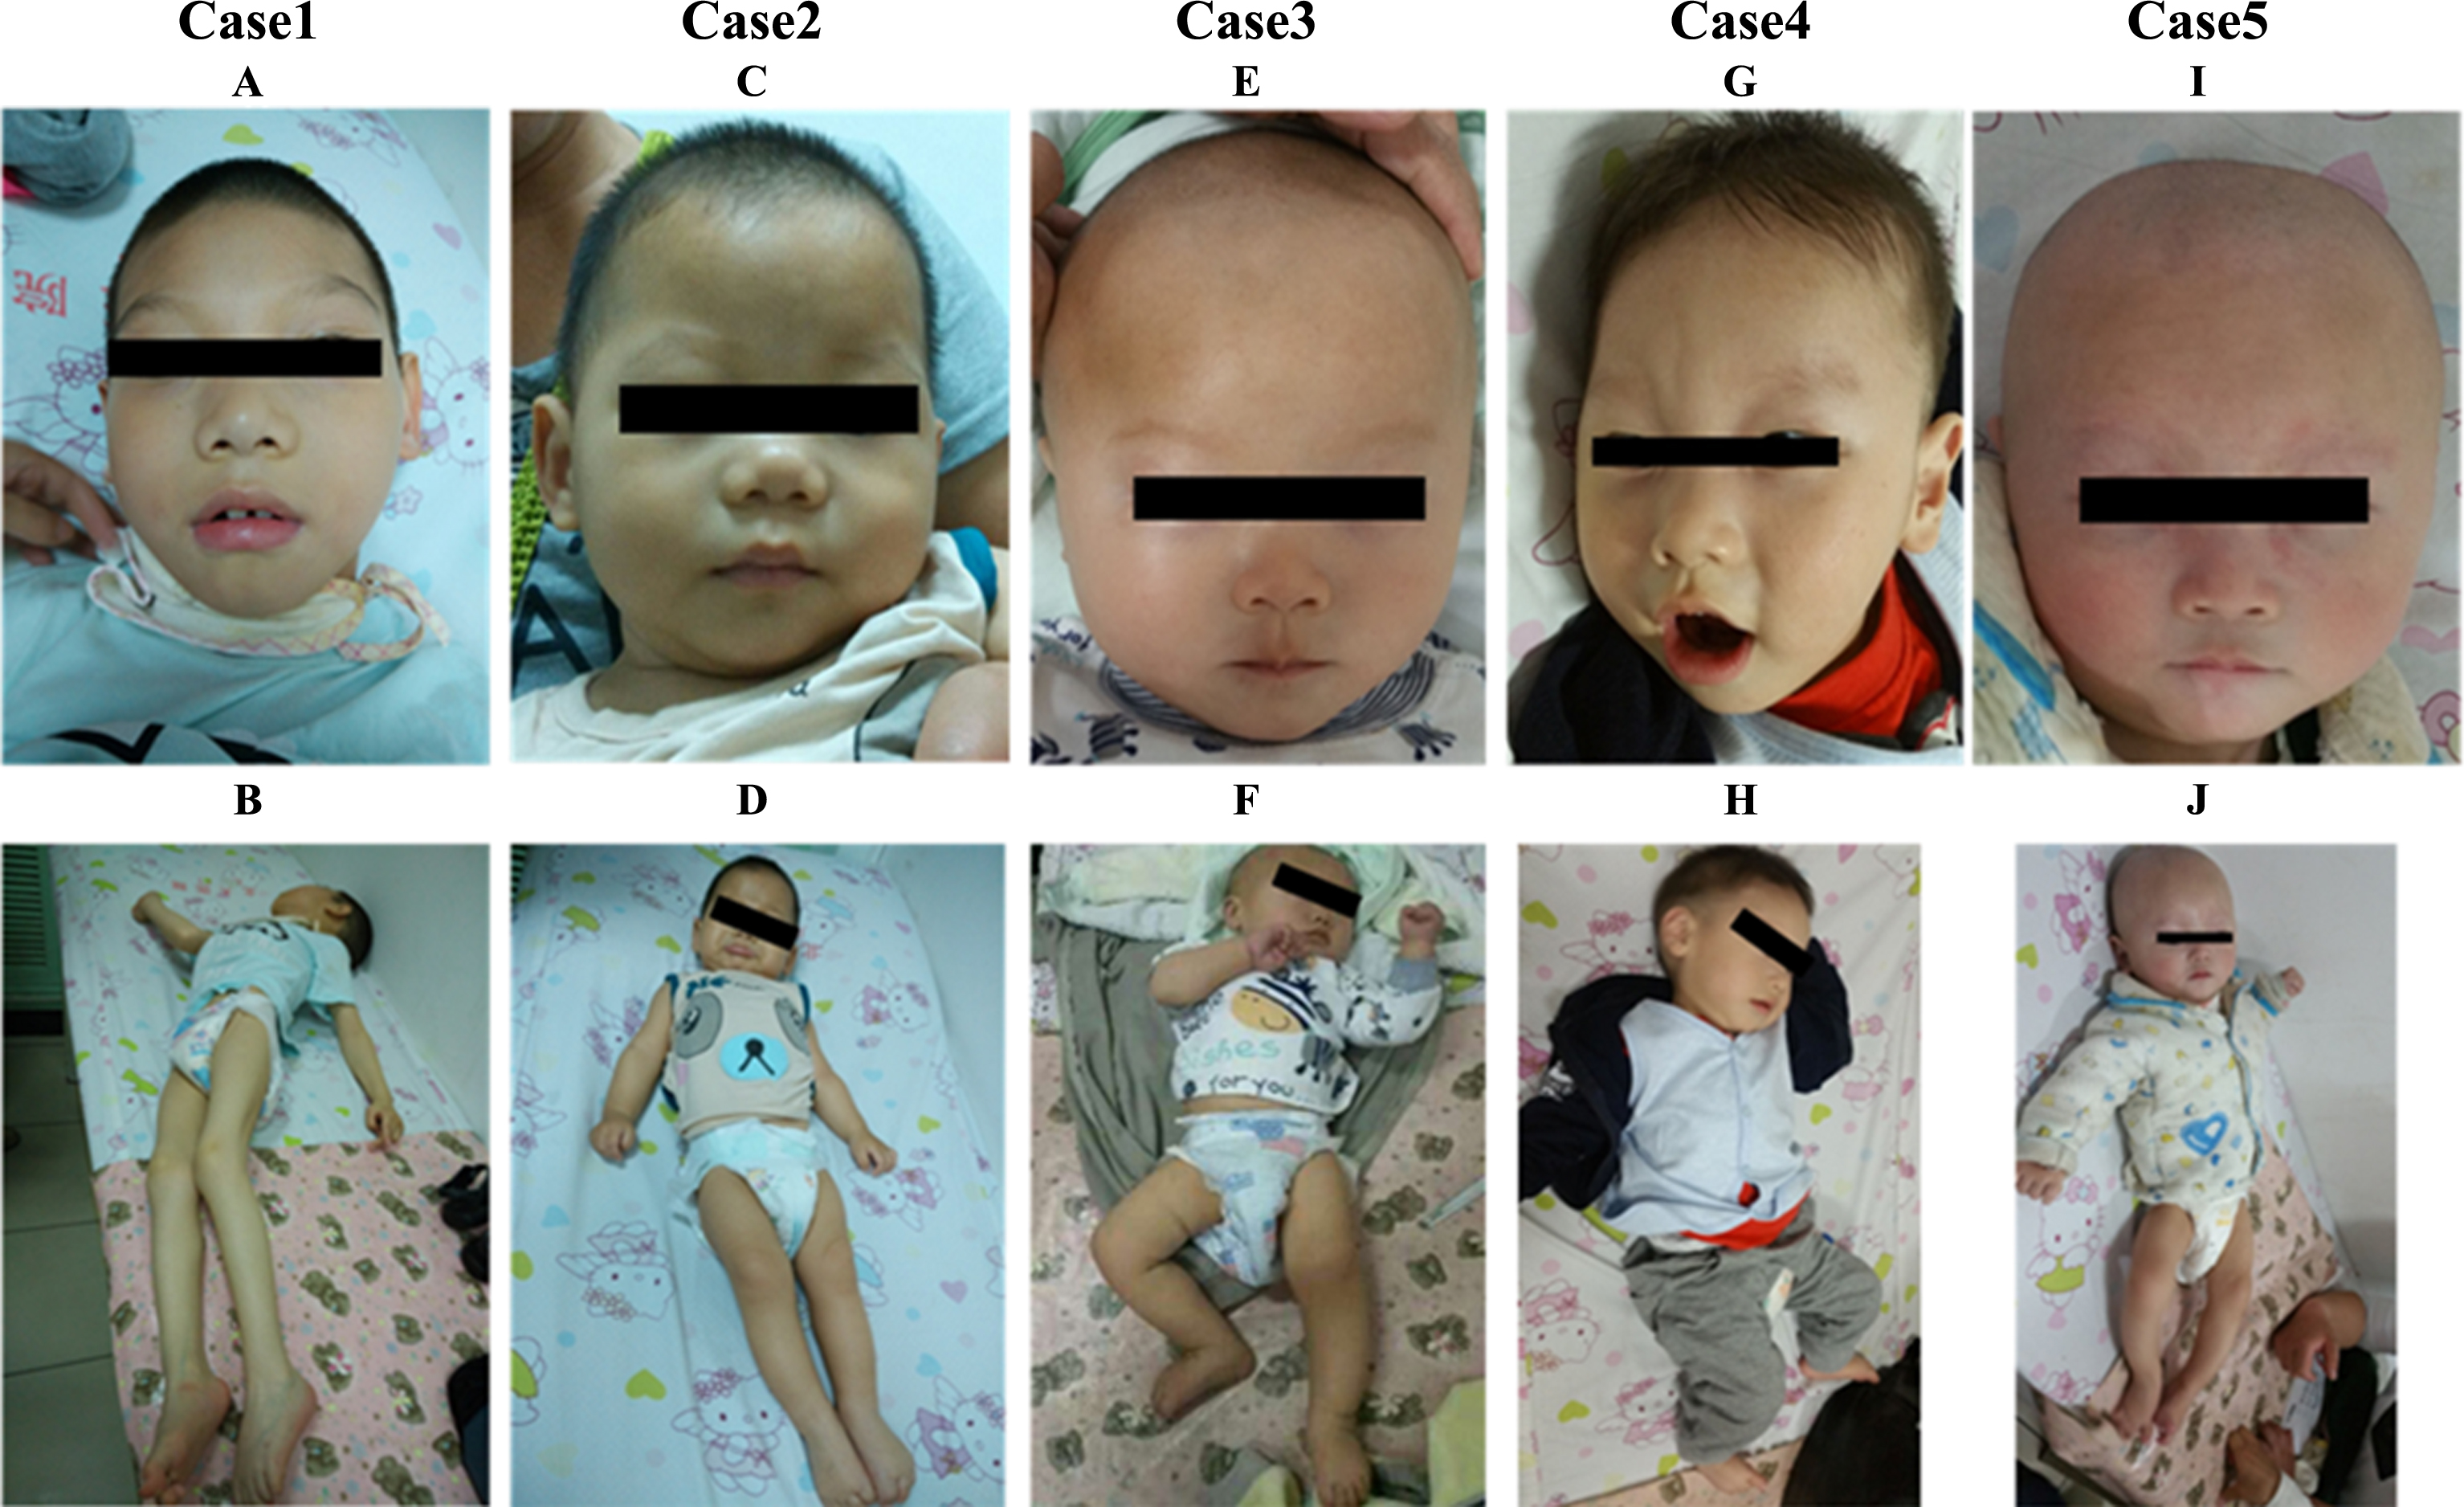 Pictures of 5 AHDS males in our study. A and G show that patients (Case 1 and 4) had facial appearance, including elongated and myopathic face, prominent eyes, narrow forehead, narrow cheeks, bigger ears, tented upper lip. C, E and I show that the patients (Case 2, 3 and 5) had normal appearance. B and J showed patients (Case 1 and 4) displaying twisted posture. Muscle hypoplasia was also obvious in Case 1.